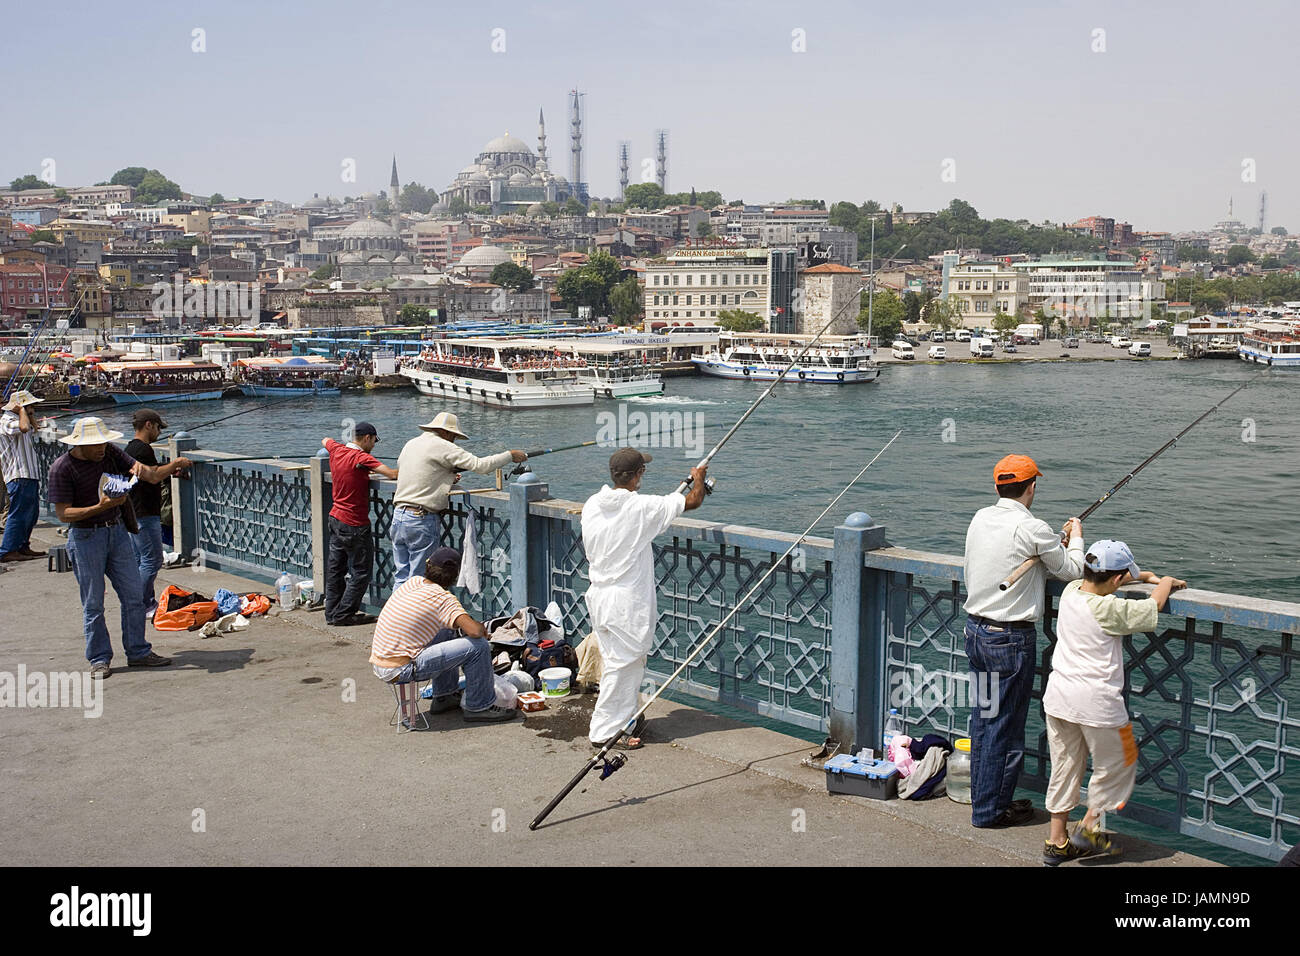 Turkey,Istanbul,town view,'the Golden Horn',Galata bridge,fisherman,no model release,town,city,metropolis,port,culture,place of interest,tourism,architecture,the Bosporus,sea,navigation,holiday ships,ships,towers,minarets,mosque,person,men,children,hinge,catch, Stock Photo